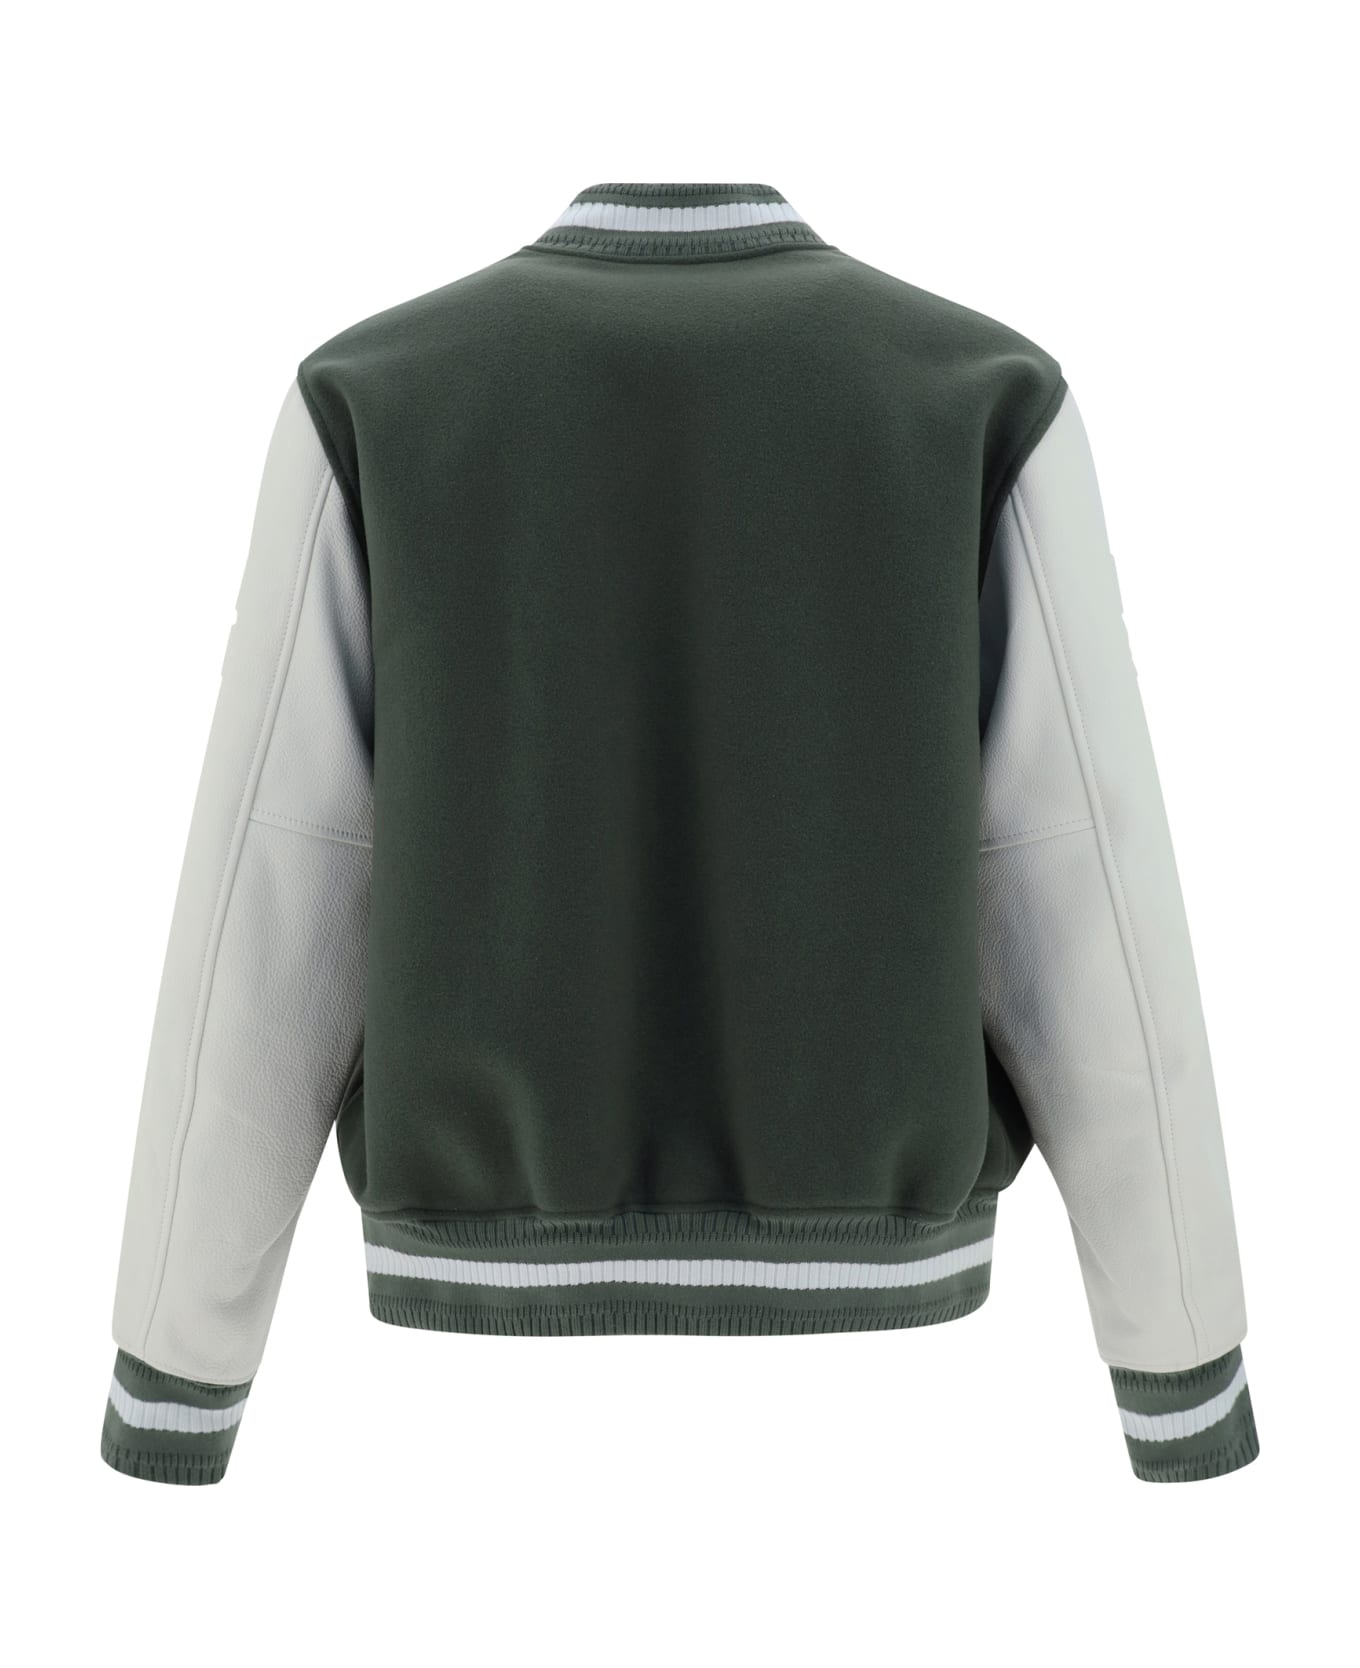 Givenchy Bomber Jacket In Wool And Leather - Green ショーツ